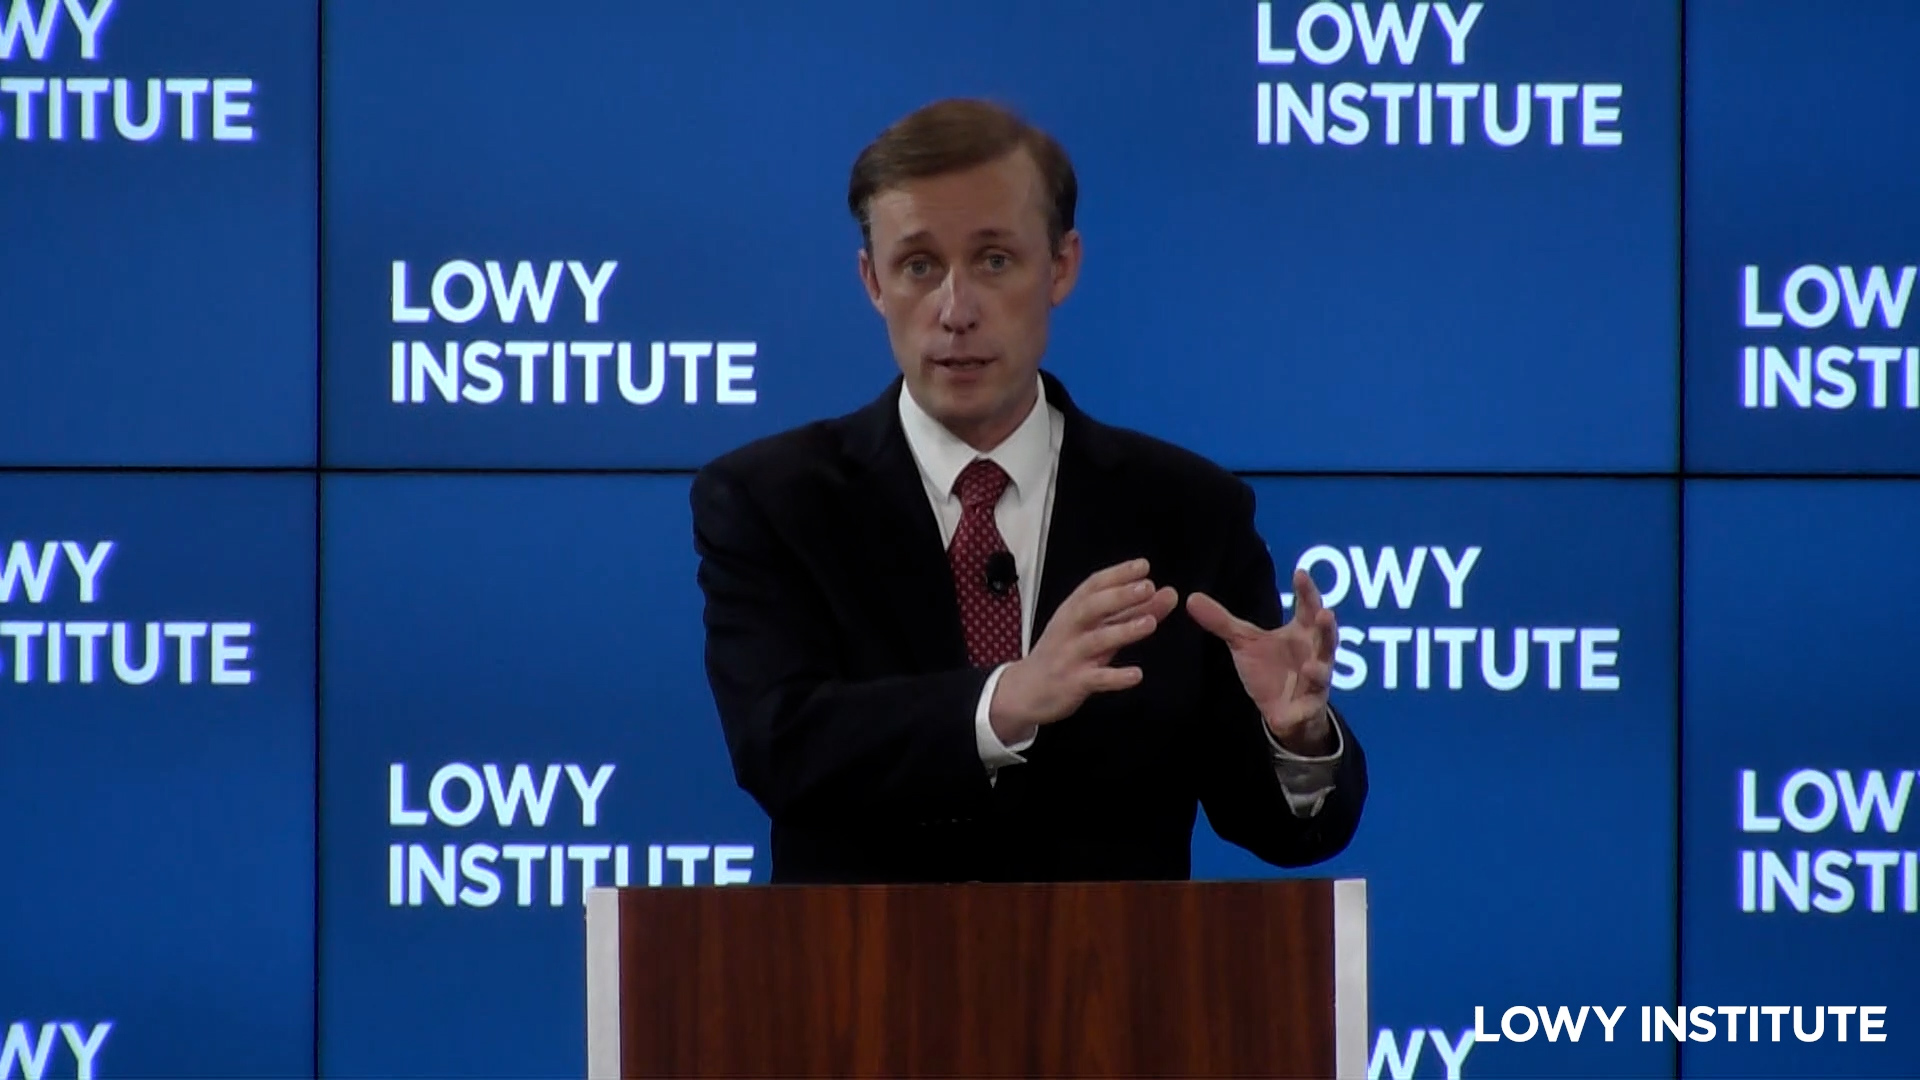 The 2021 Lowy Lecture was given on 11 November 2021 by Jake Sullivan, National Security Adviser to US President Joe Biden